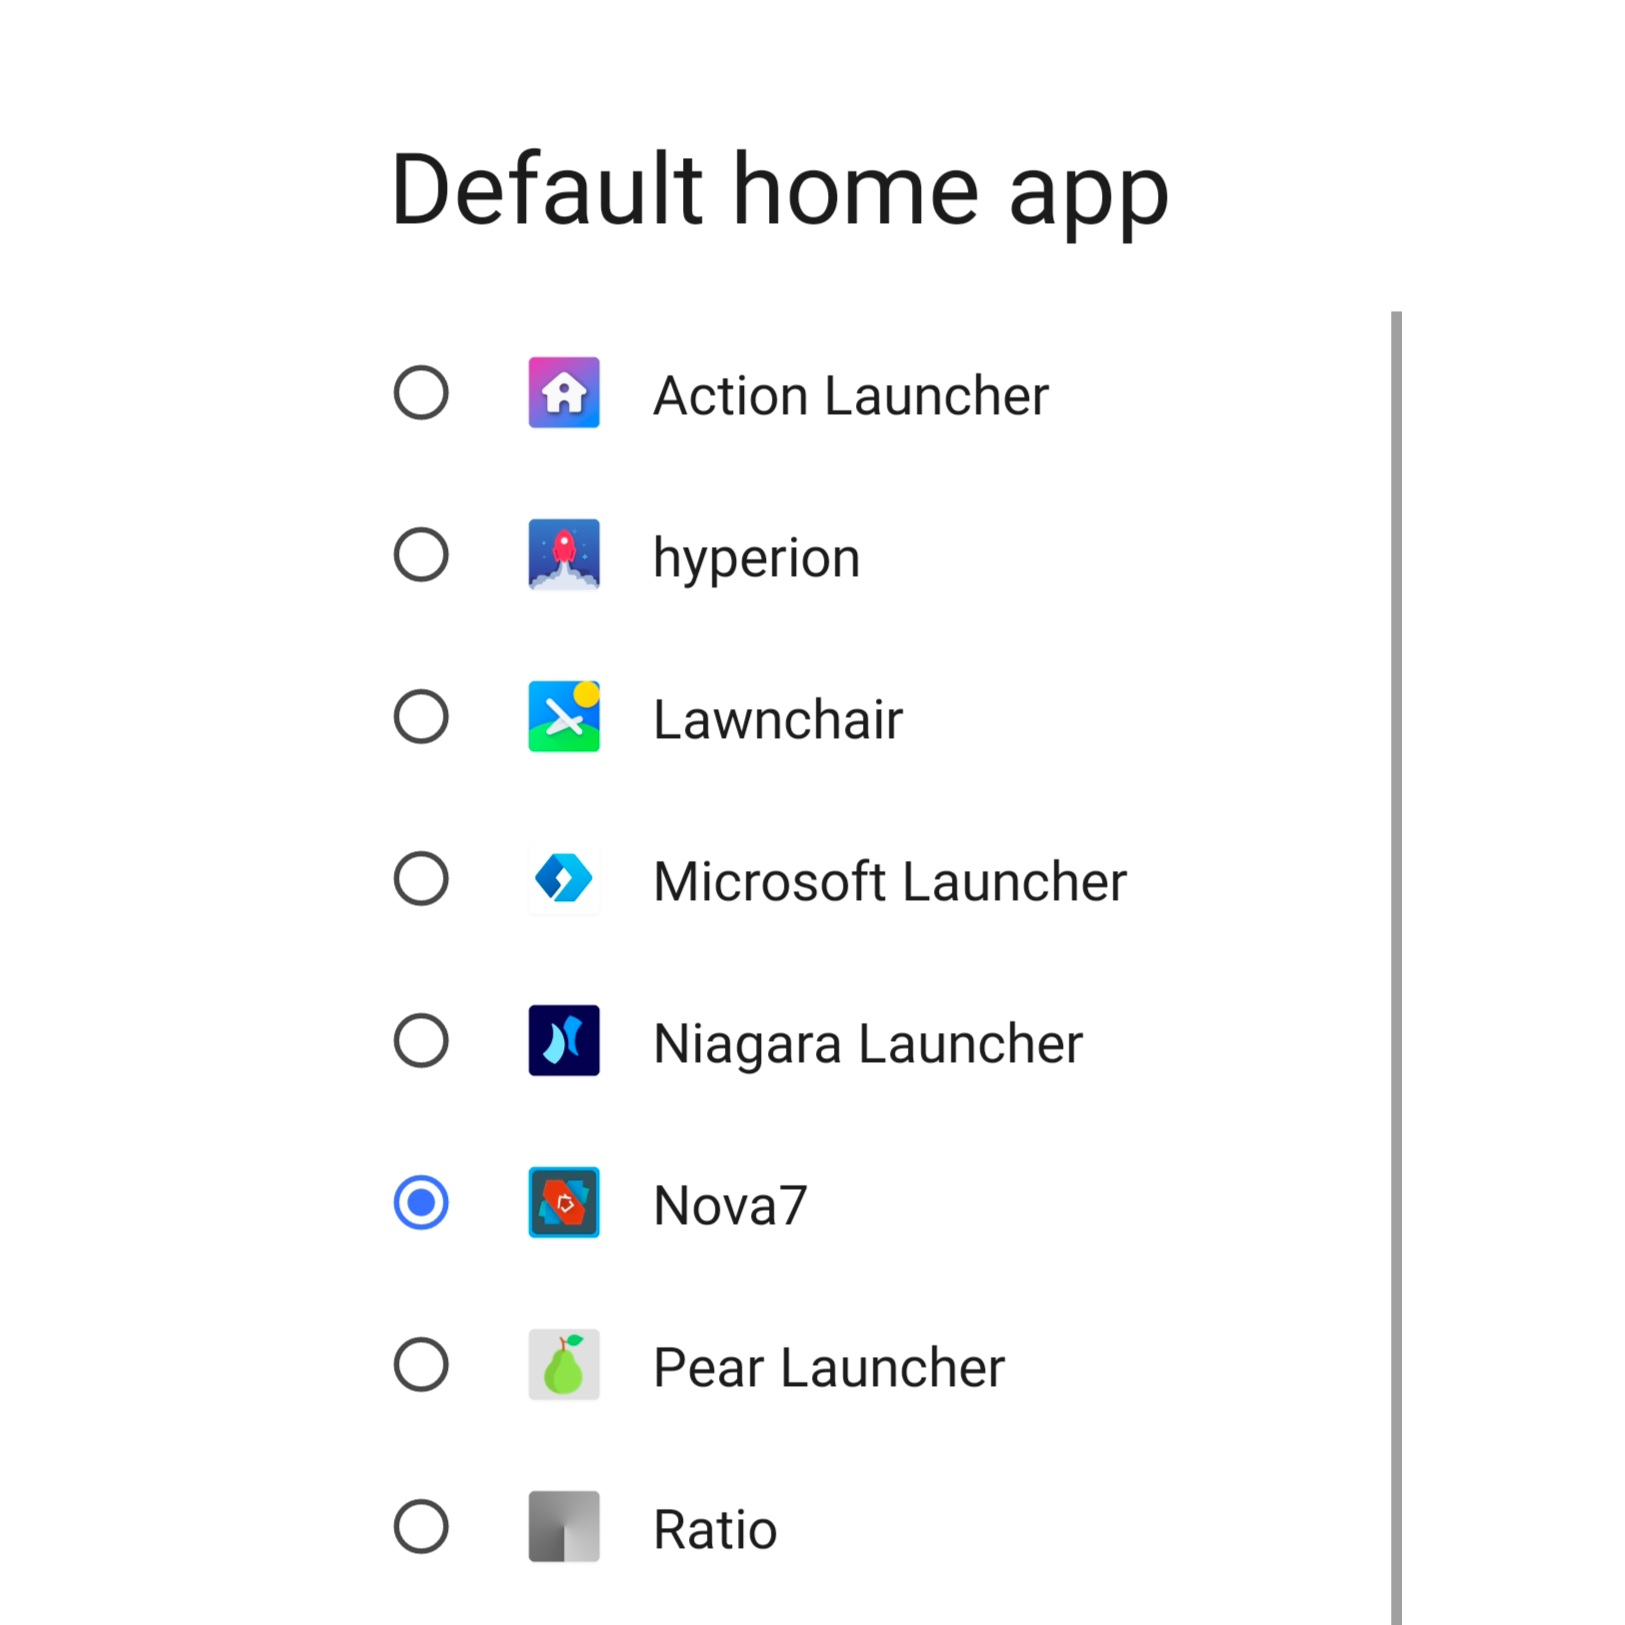 The 'default home app' selection screen displaying all the installed Android launchers on the device. 